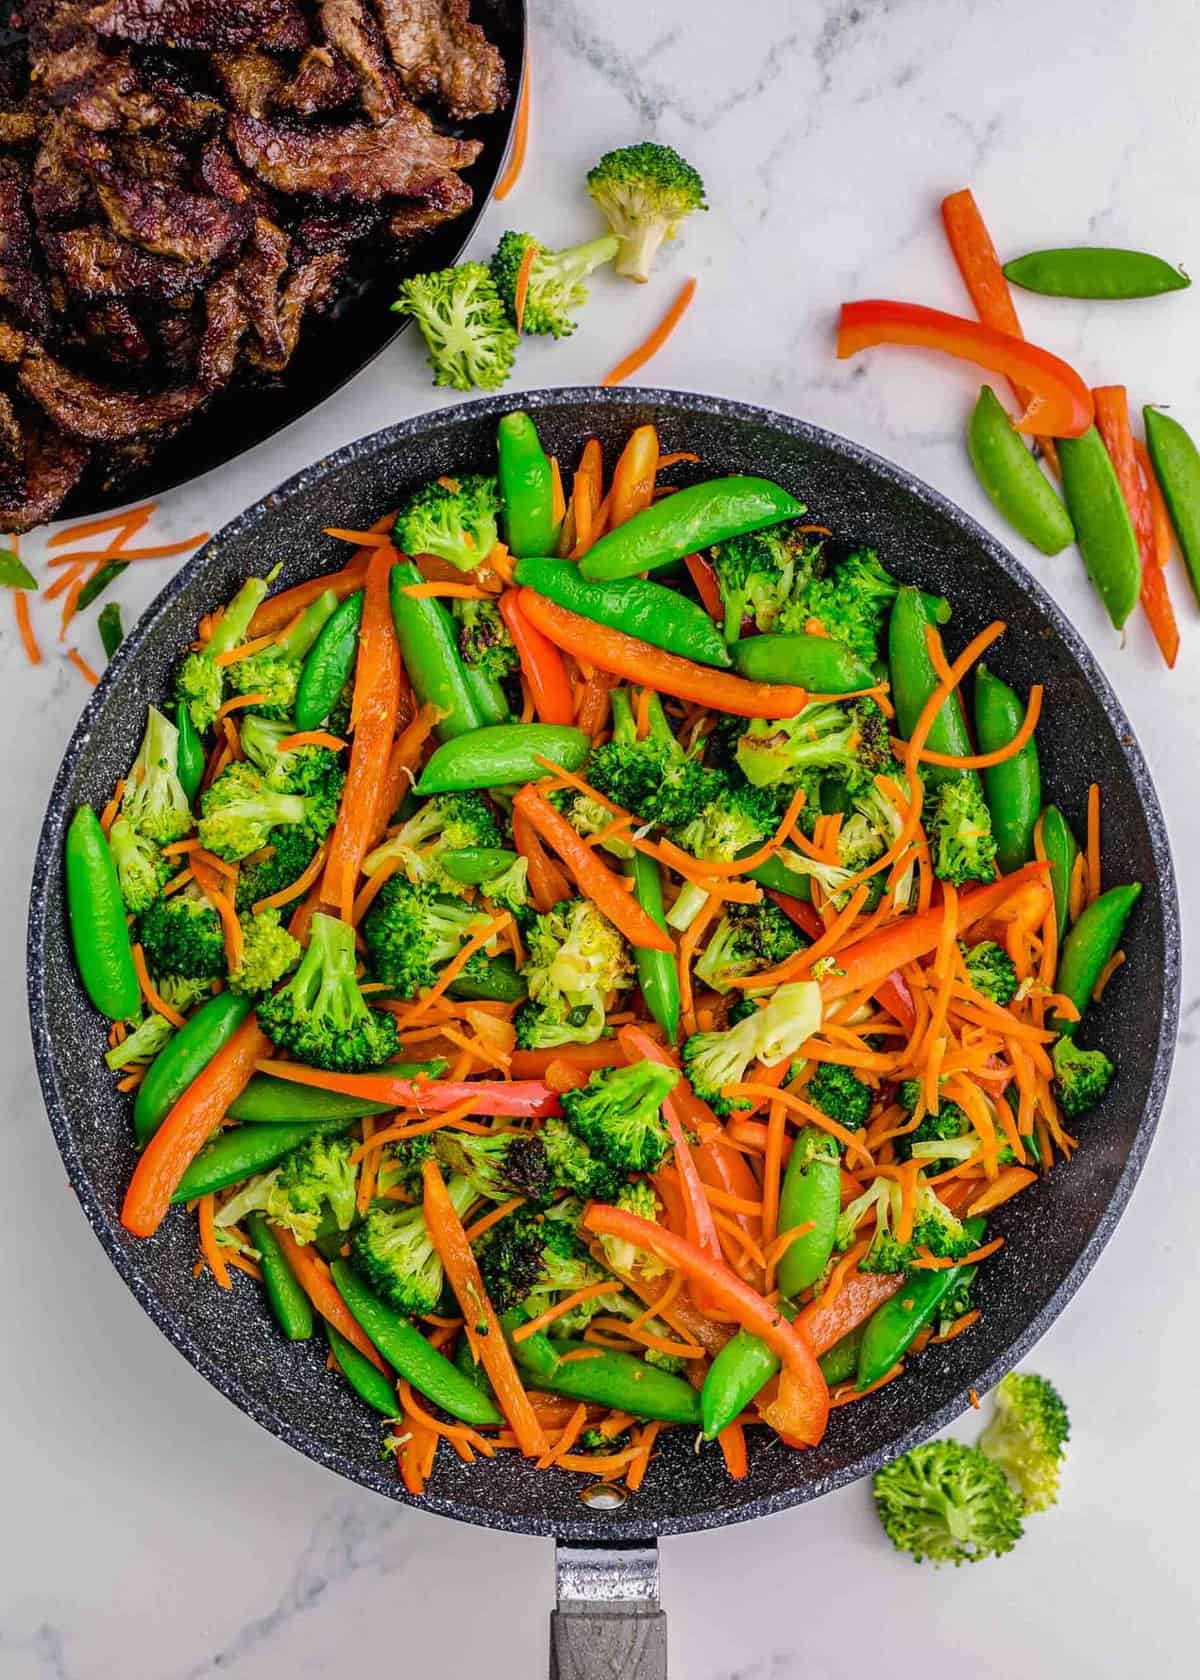 broccoli, sugar snap peas, carrots, and red bell peppers in a grey nonstick skillet on a marble countertop next to a plate of browned beef slices